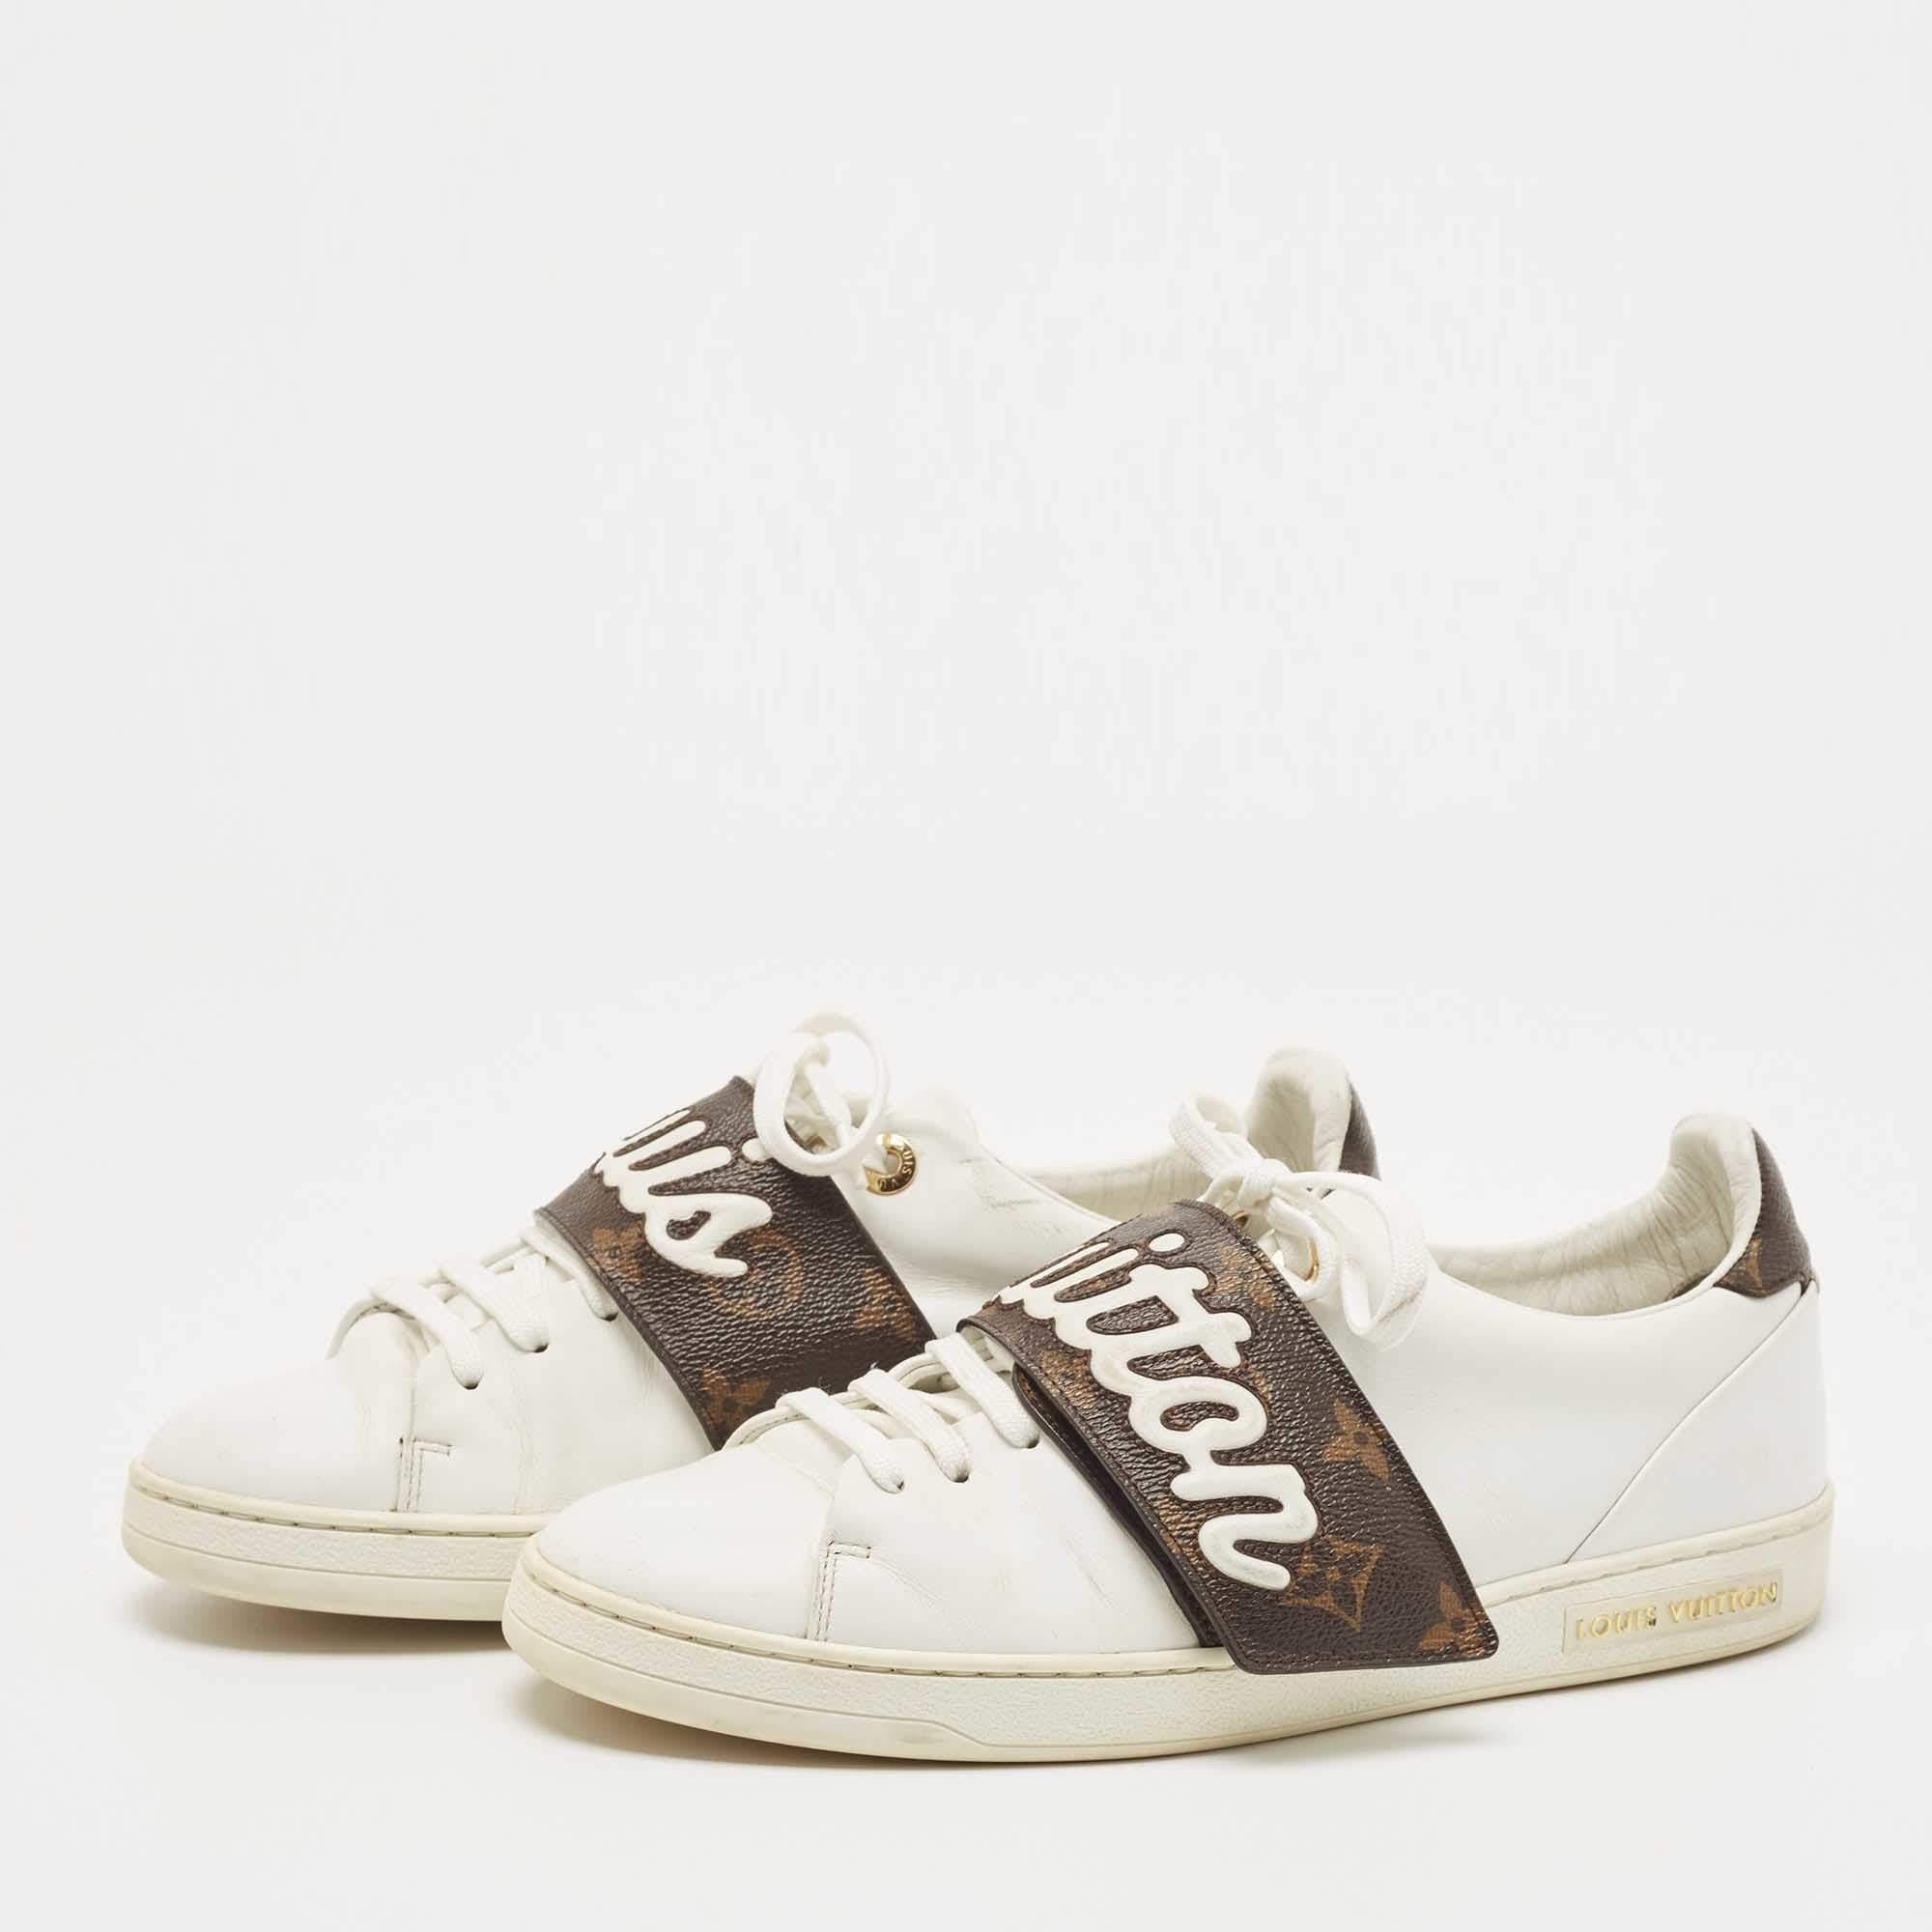 You'll love wearing these Frontrow sneakers from Louis Vuitton! The white sneakers are crafted from leather along with canvas and feature round toes along with gold-tone logo accents on the lace-up vamps as well as on the midsoles. They come